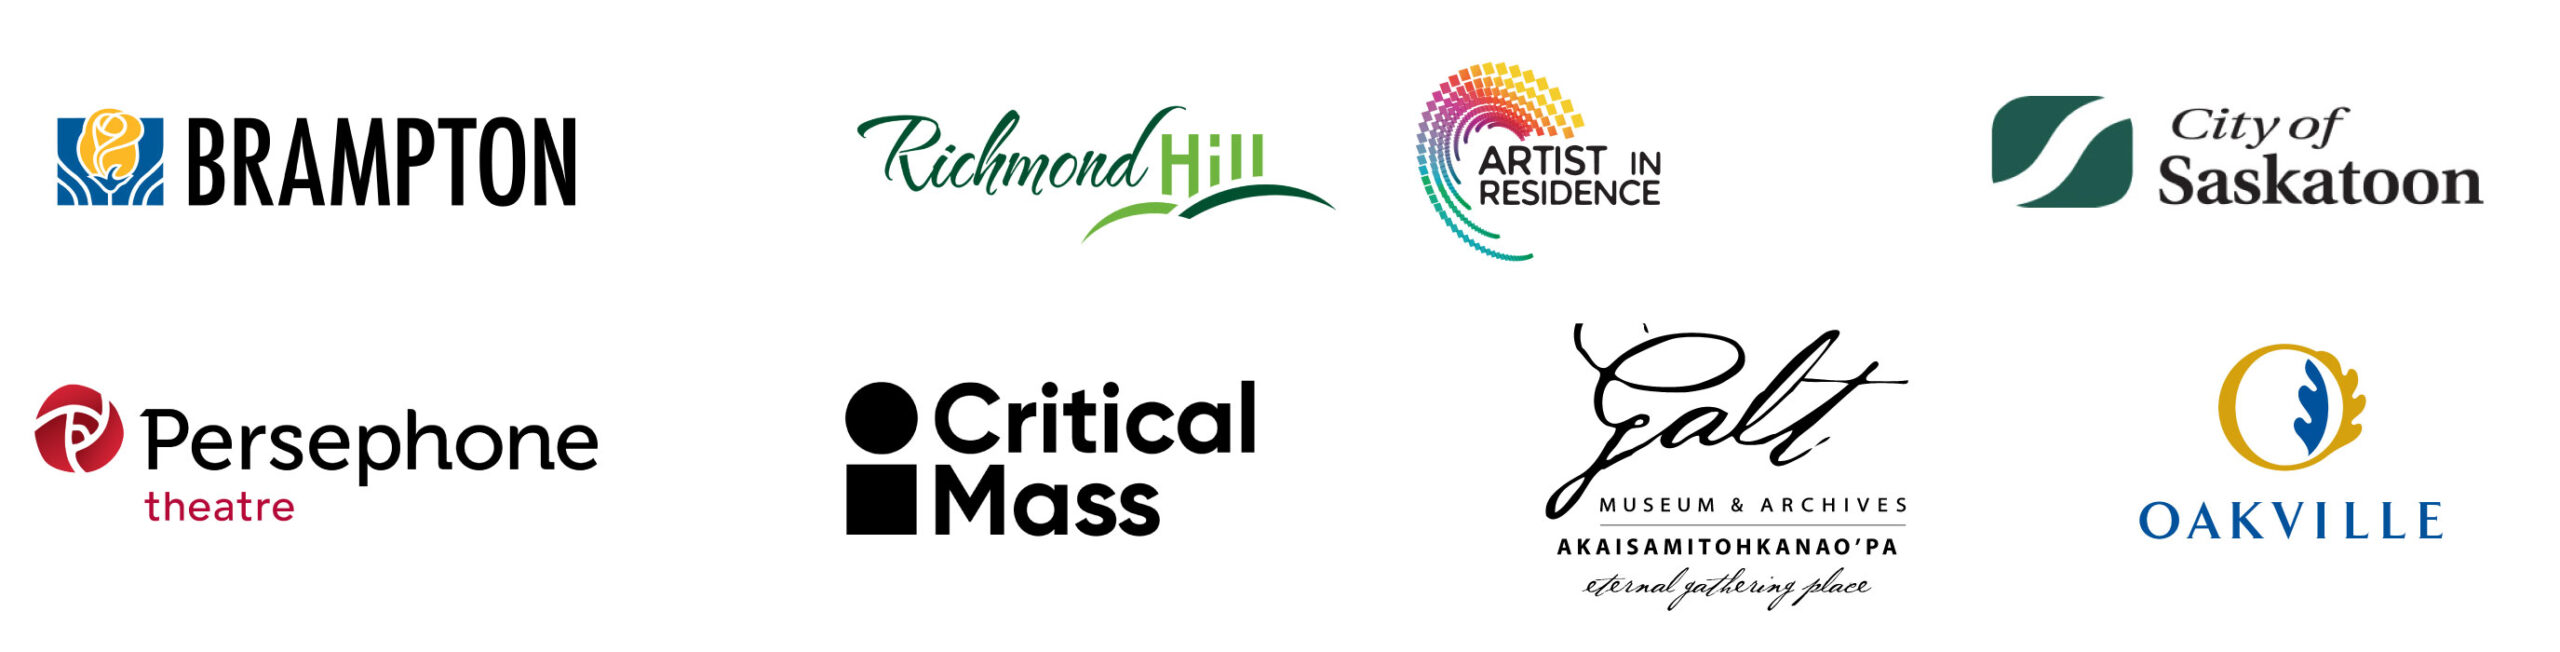 Partners for the 2024 CreateSpace Public Art Residency by STEPS Public Art, including the City of Brampton, City of Richmond Hill, City of Saskatoon, Persephone Theatre, Critical Mass, Galt Museum, and Town of Oakville.